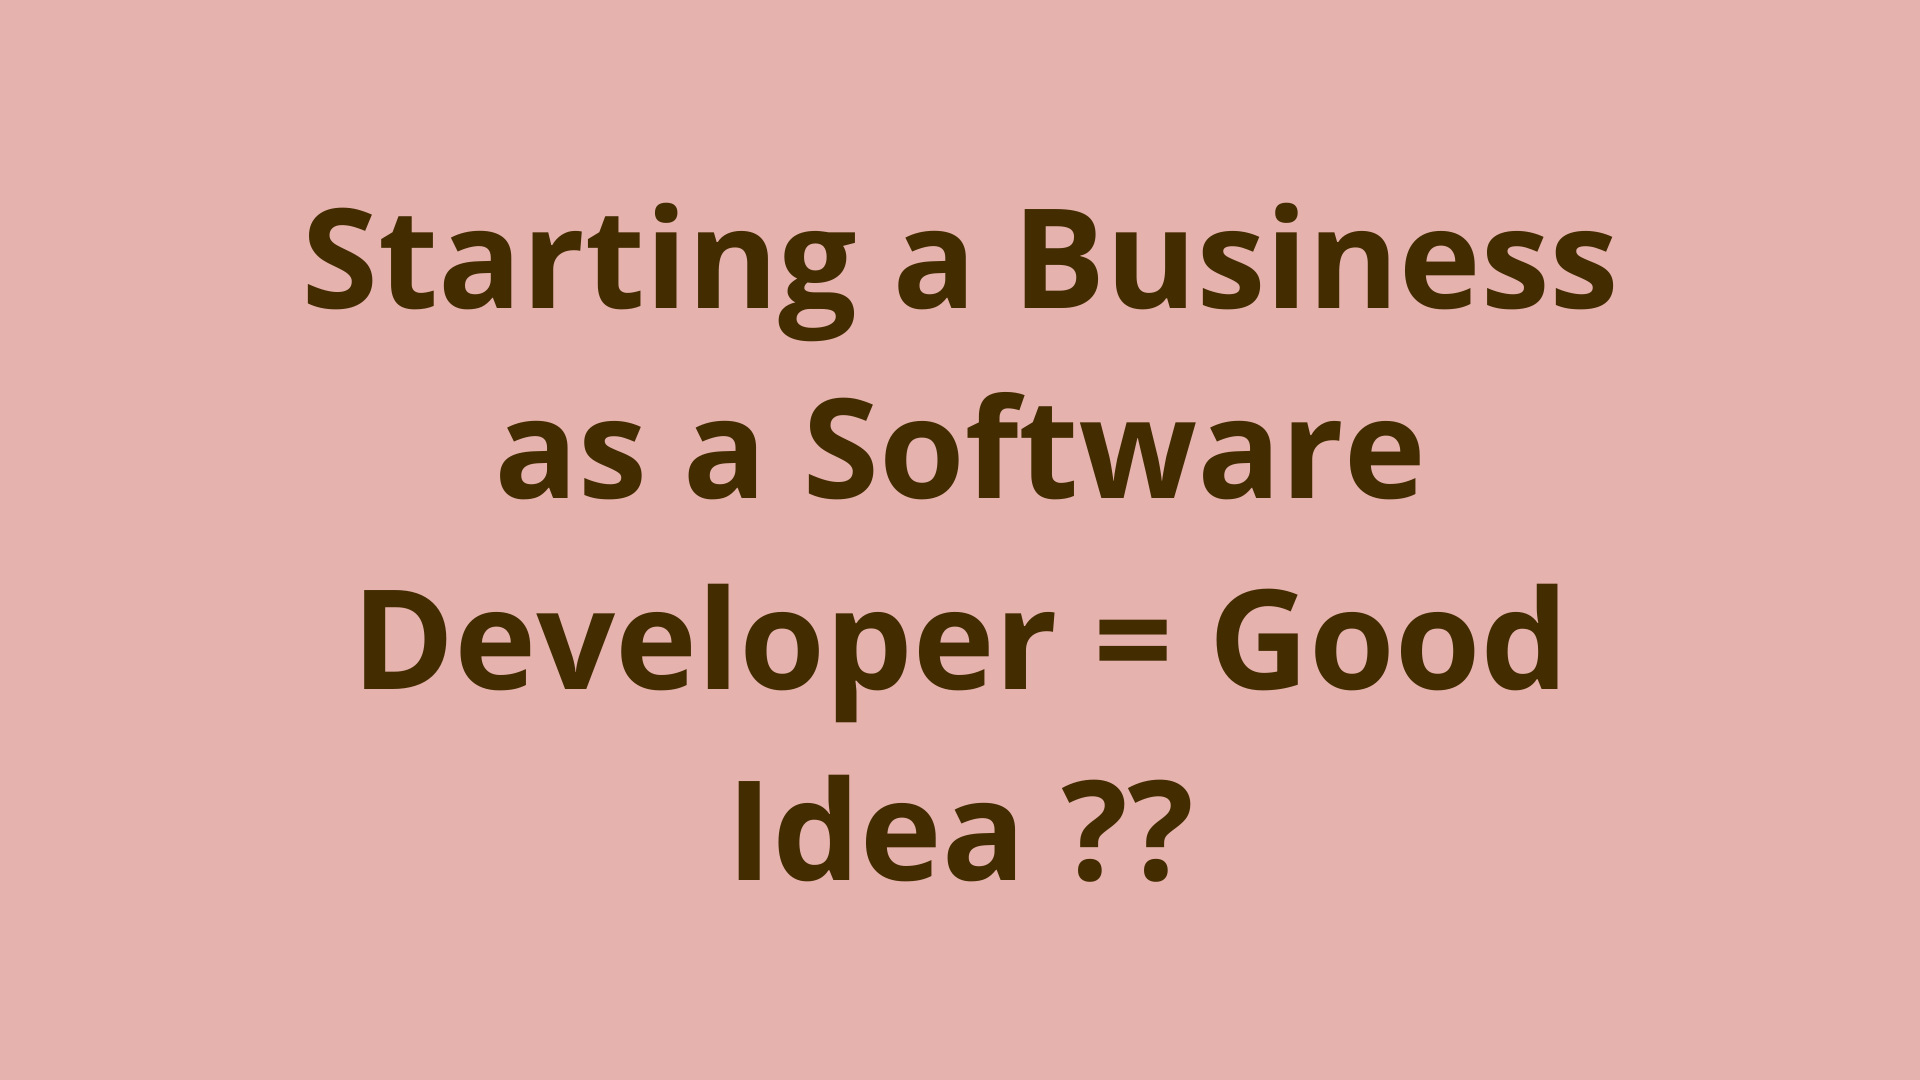 Image of Why starting a business as a software developer is a good idea